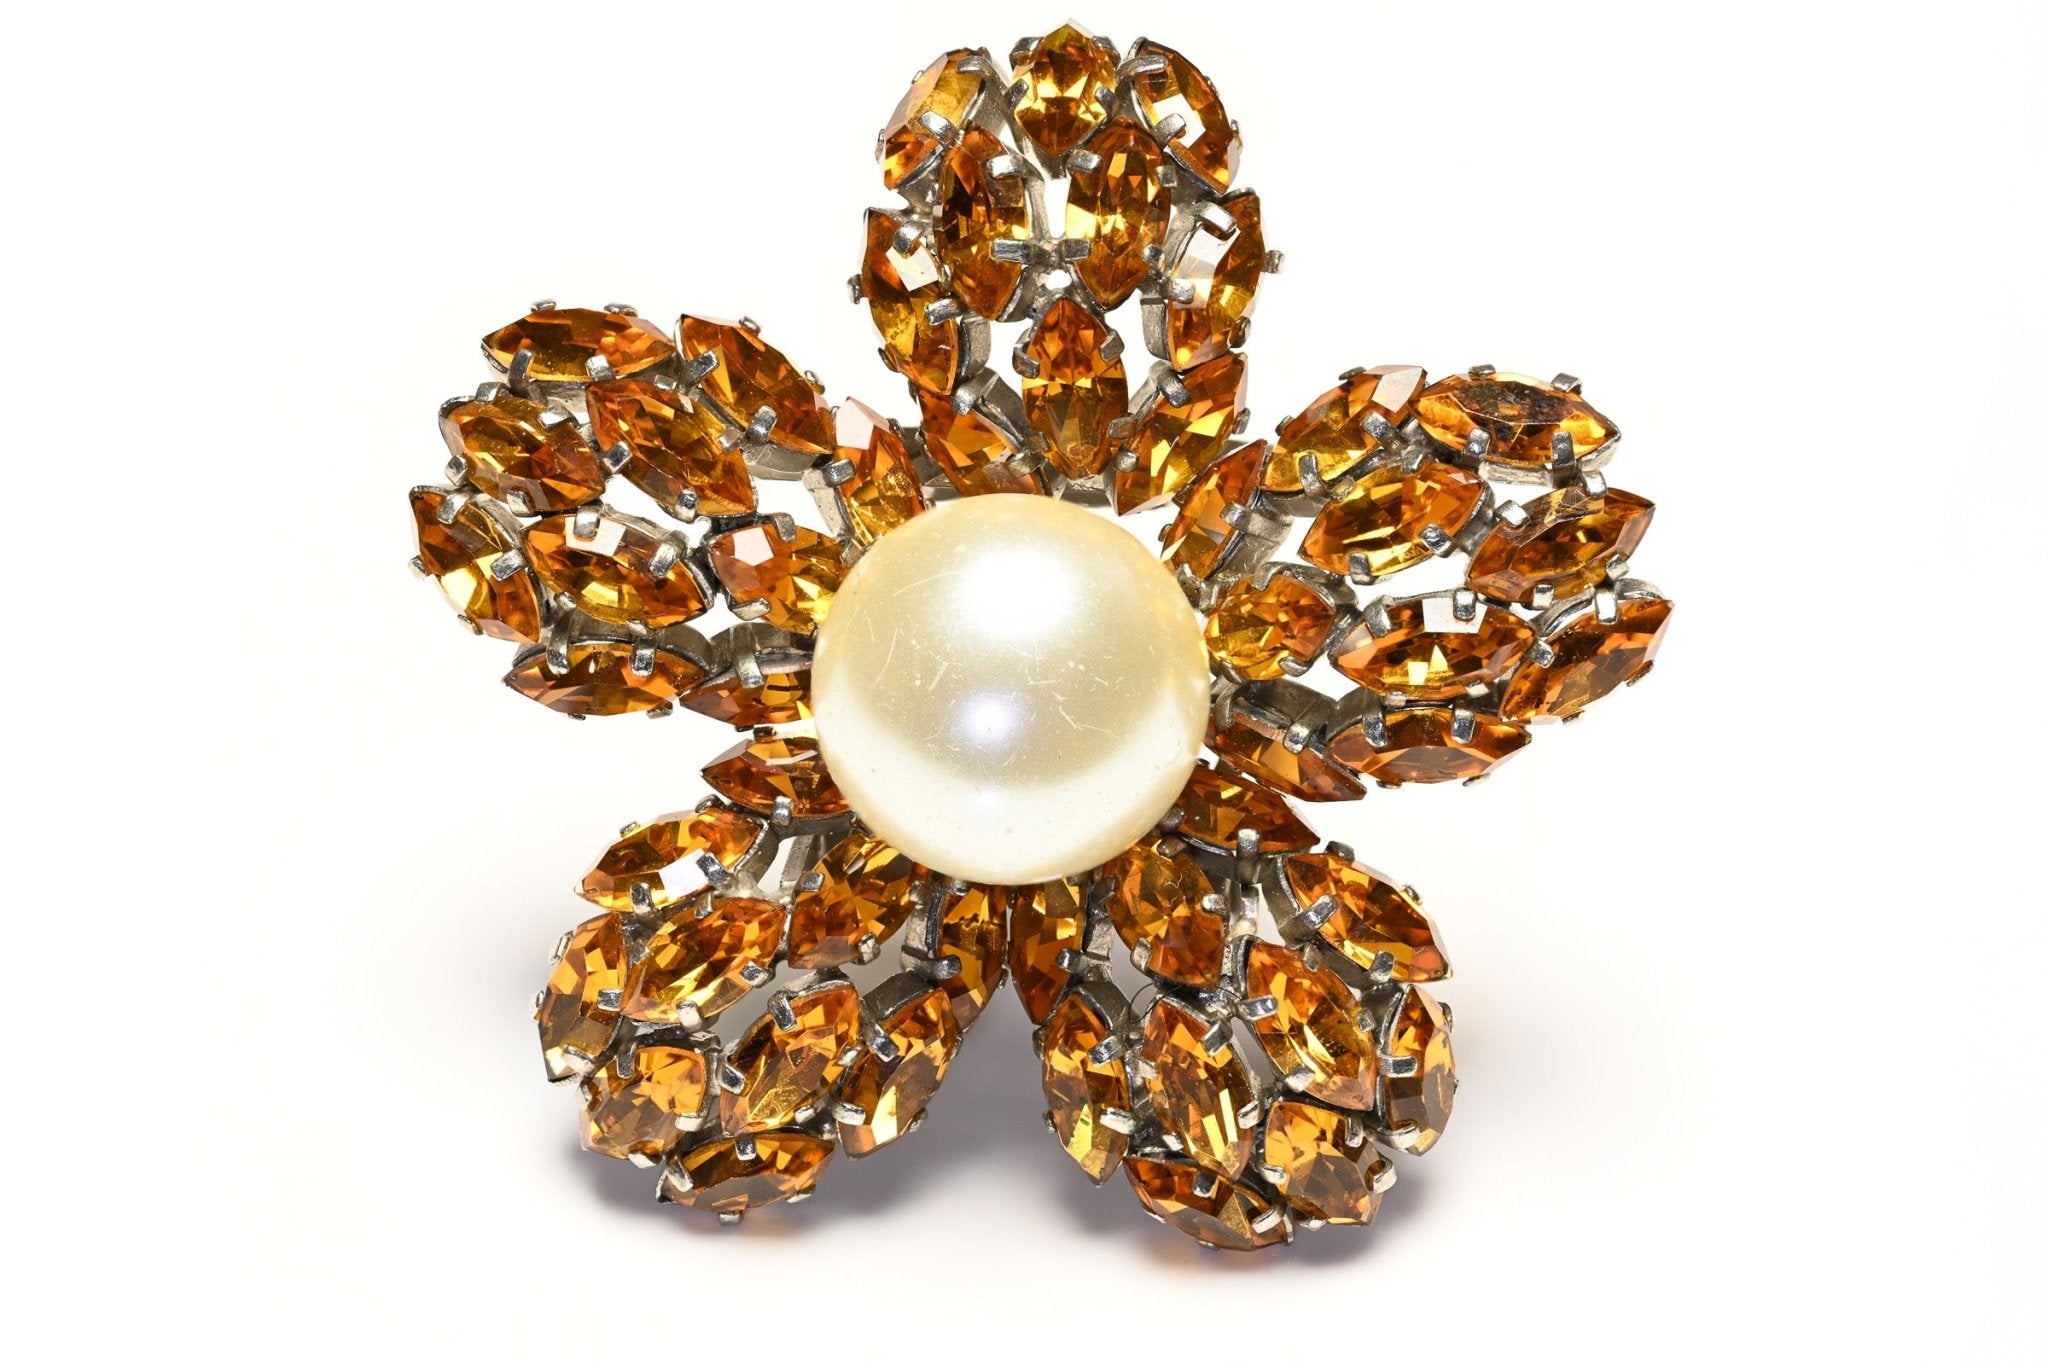 Cristobal Balenciaga by Roger Jean-Pierre Paris 1950's Brown Crystal Pearl Flower Brooch - DSF Antique Jewelry